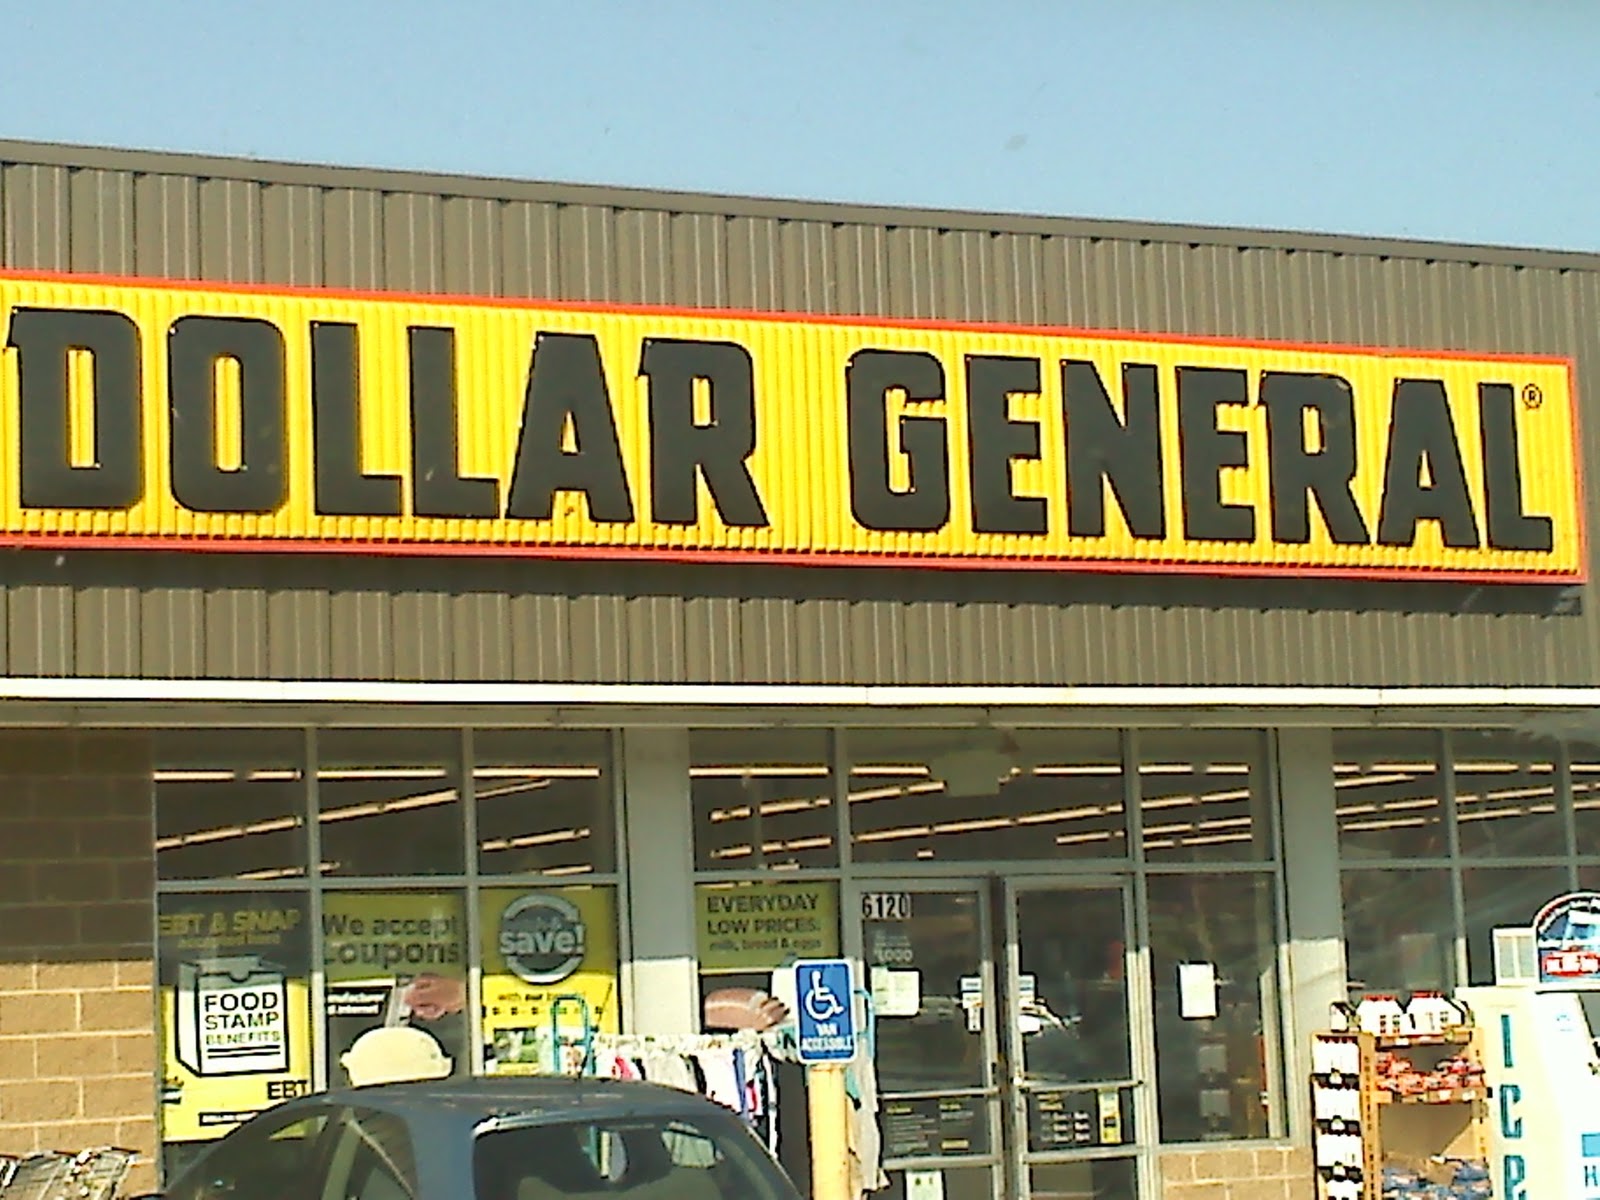 Image Dollar General Store Pc Android iPhone And iPad Wallpaper